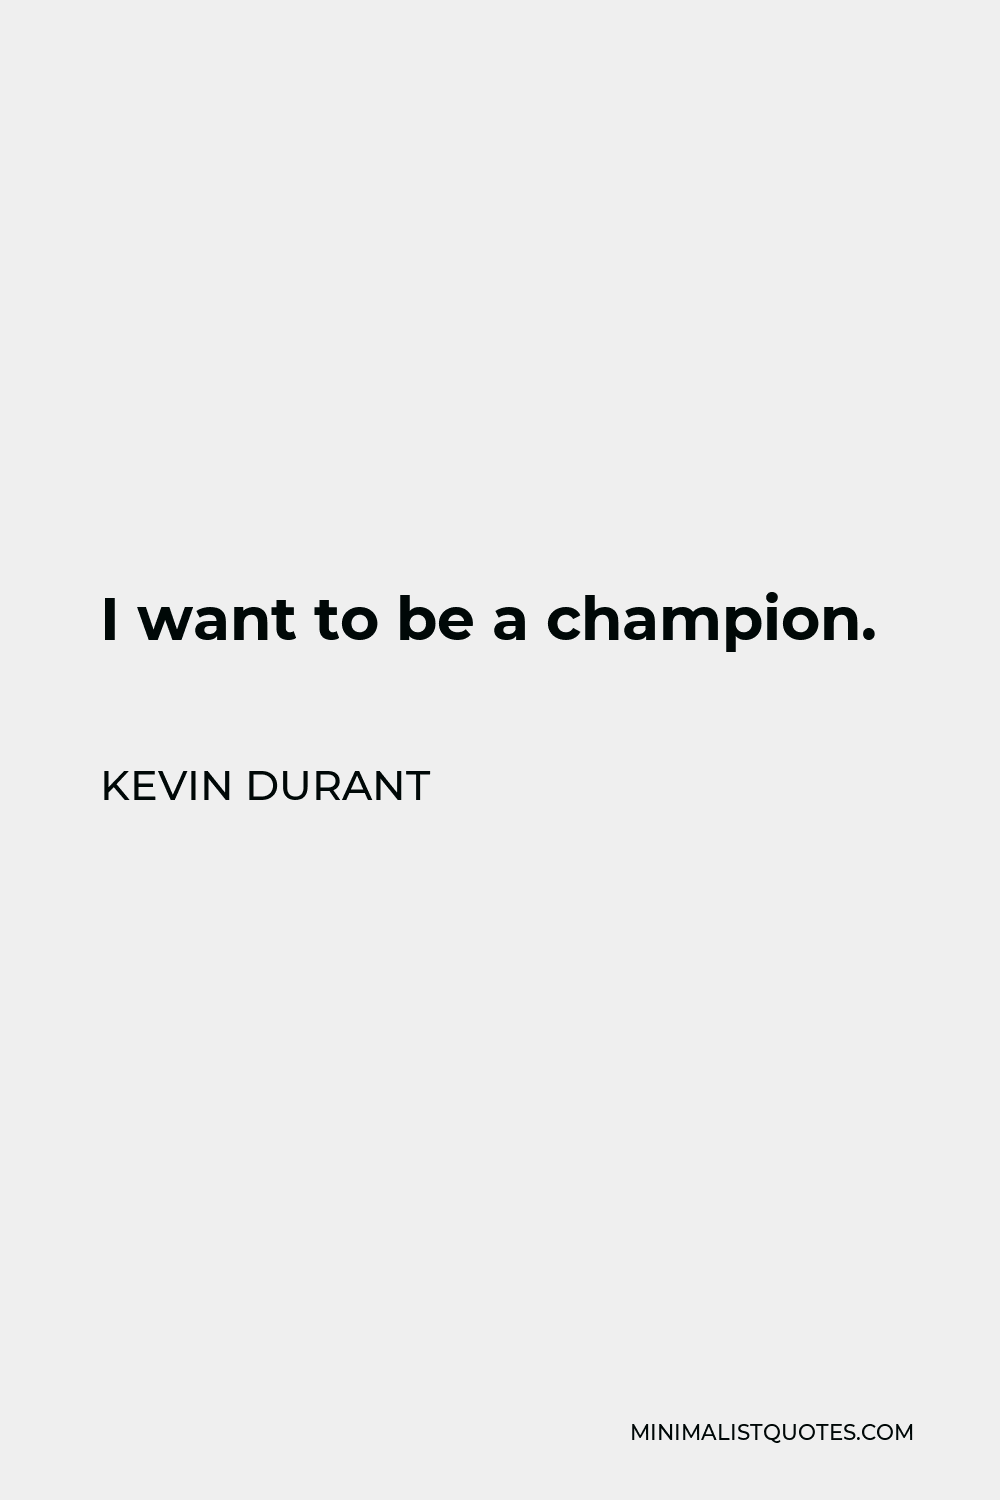 Kevin Durant Quote - I want to be a champion.